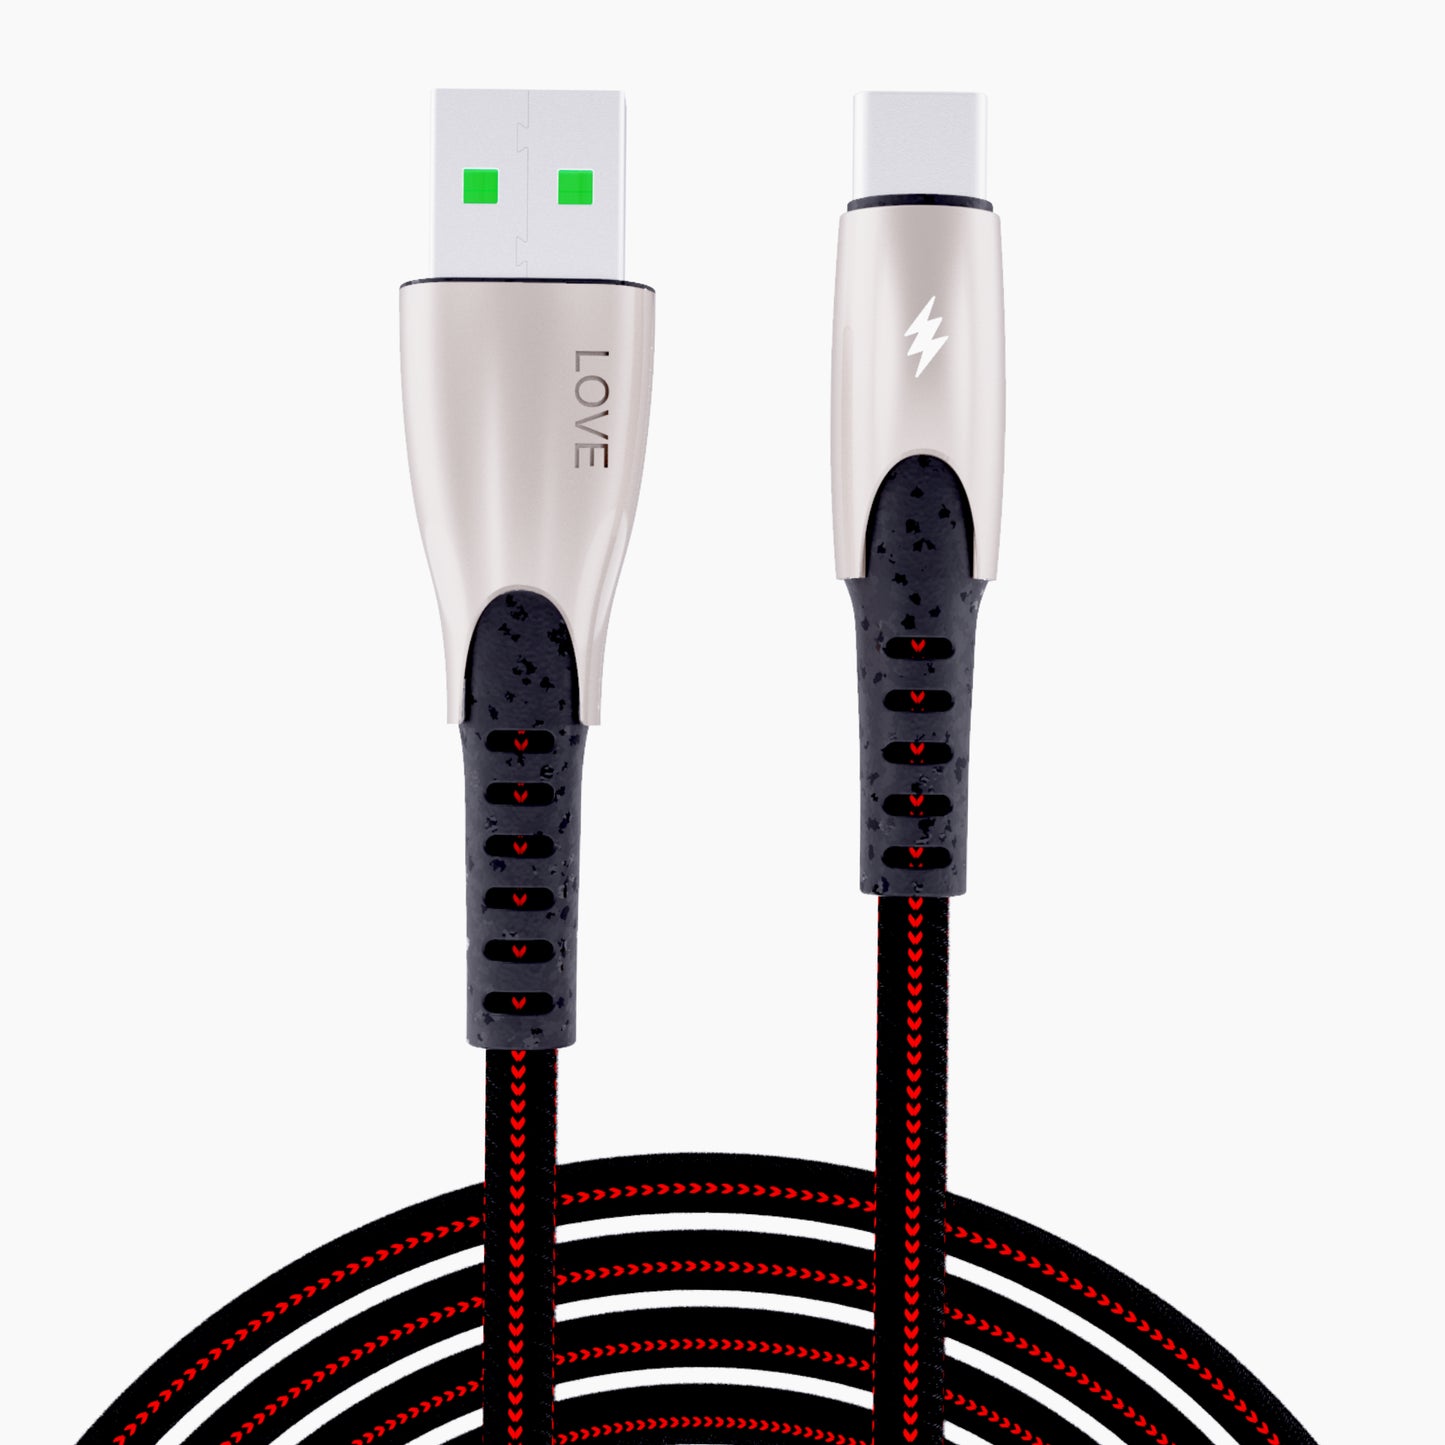 Usb Type-C Cable for Fast Charging For android and iphone with 60Watt  Output by Back-Brainers ( 1 Year Warranty)